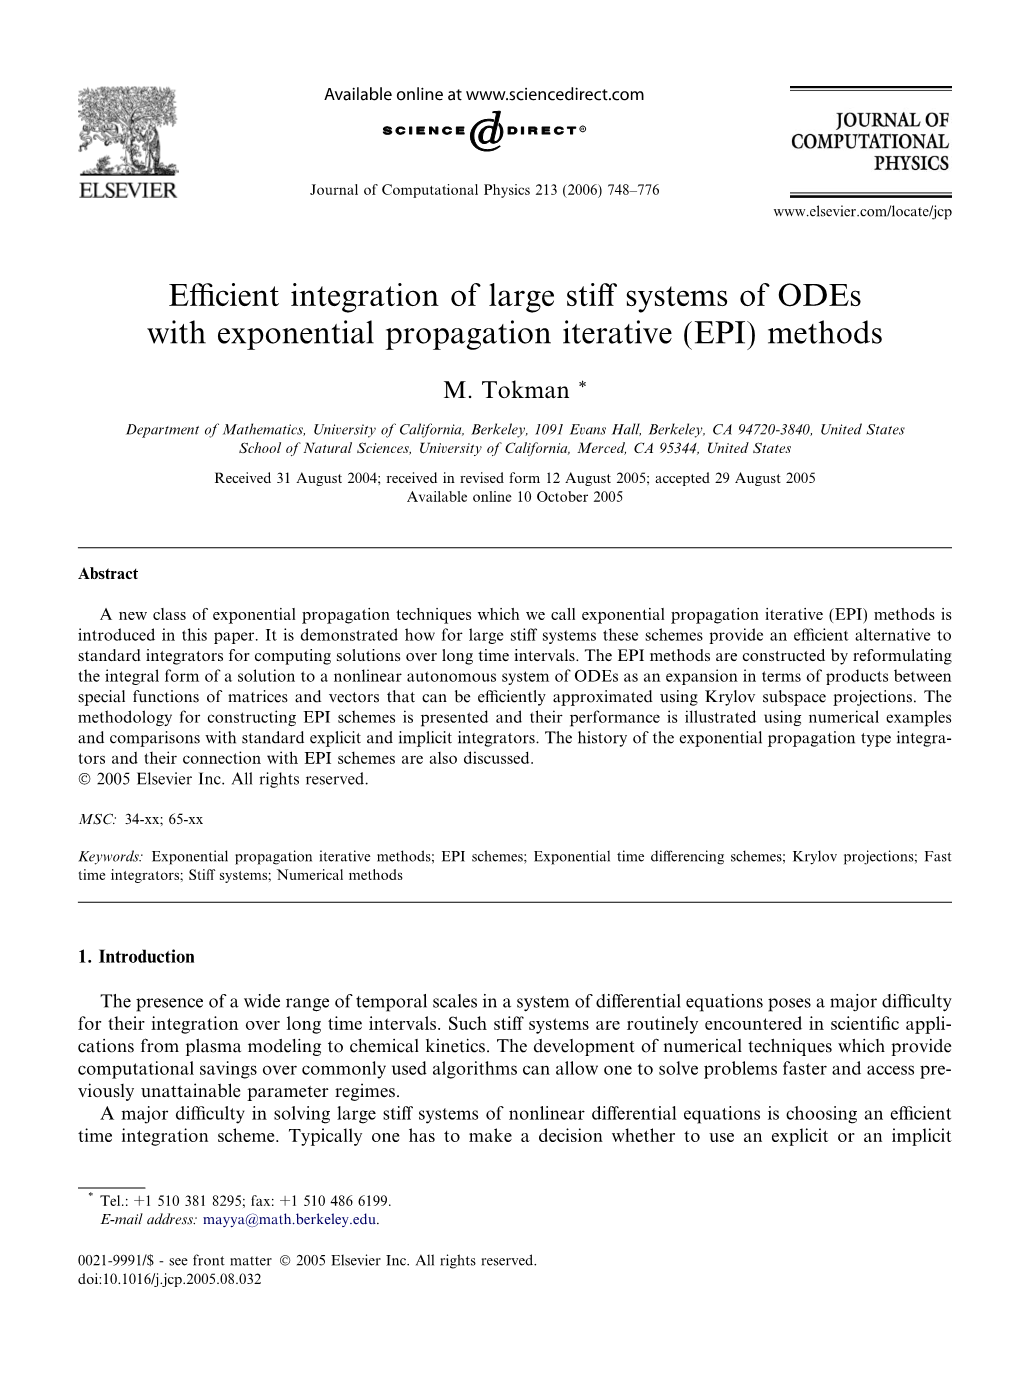 Efficient Integration of Large Stiff Systems of Odes with Exponential